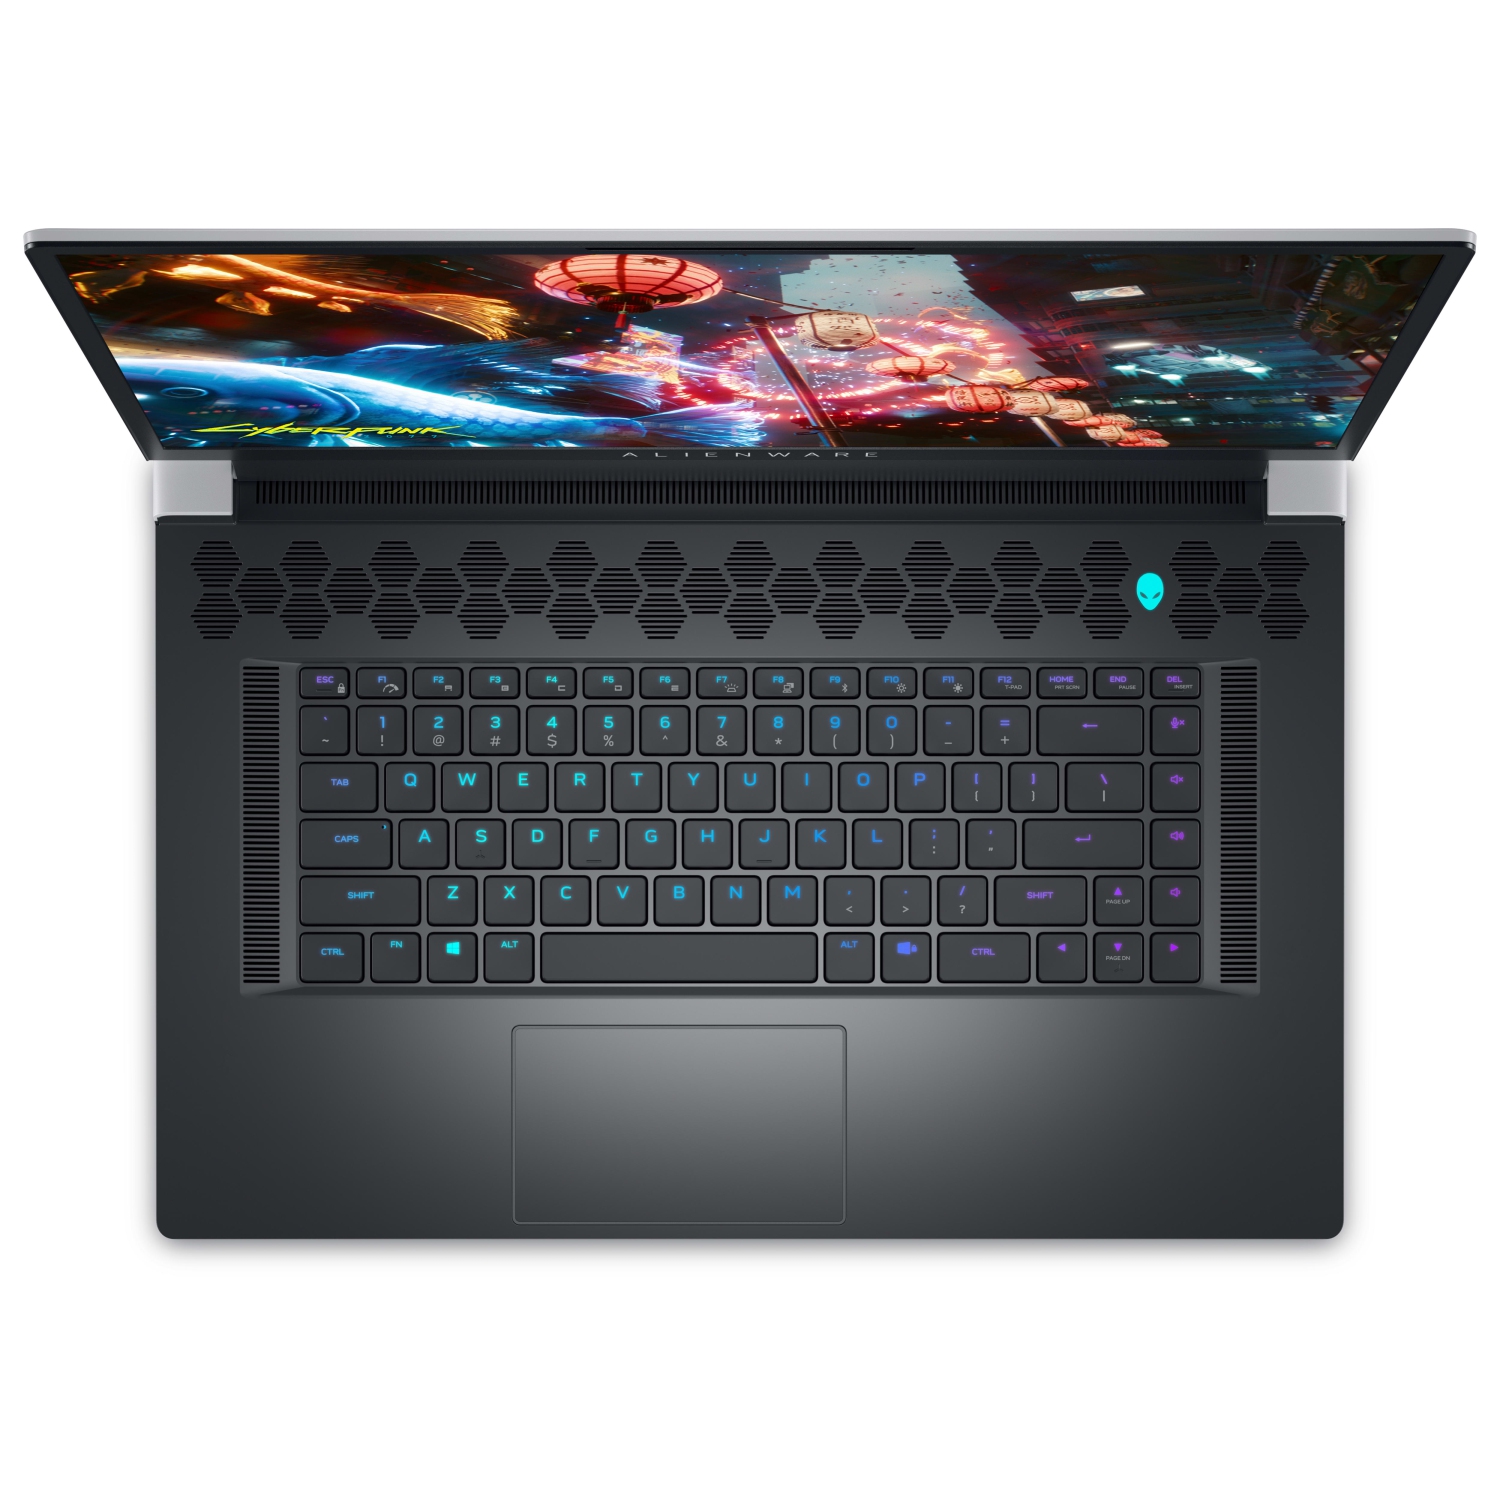 Refurbished (Excellent) – Dell Alienware X17 R2 Gaming Laptop (2022) | 17.3" FHD | Core i9 - 512GB SSD - 16GB RAM - RTX 3080 | 14 Cores @ 5 GHz - 12th Gen CPU - 8GB GDDR6X